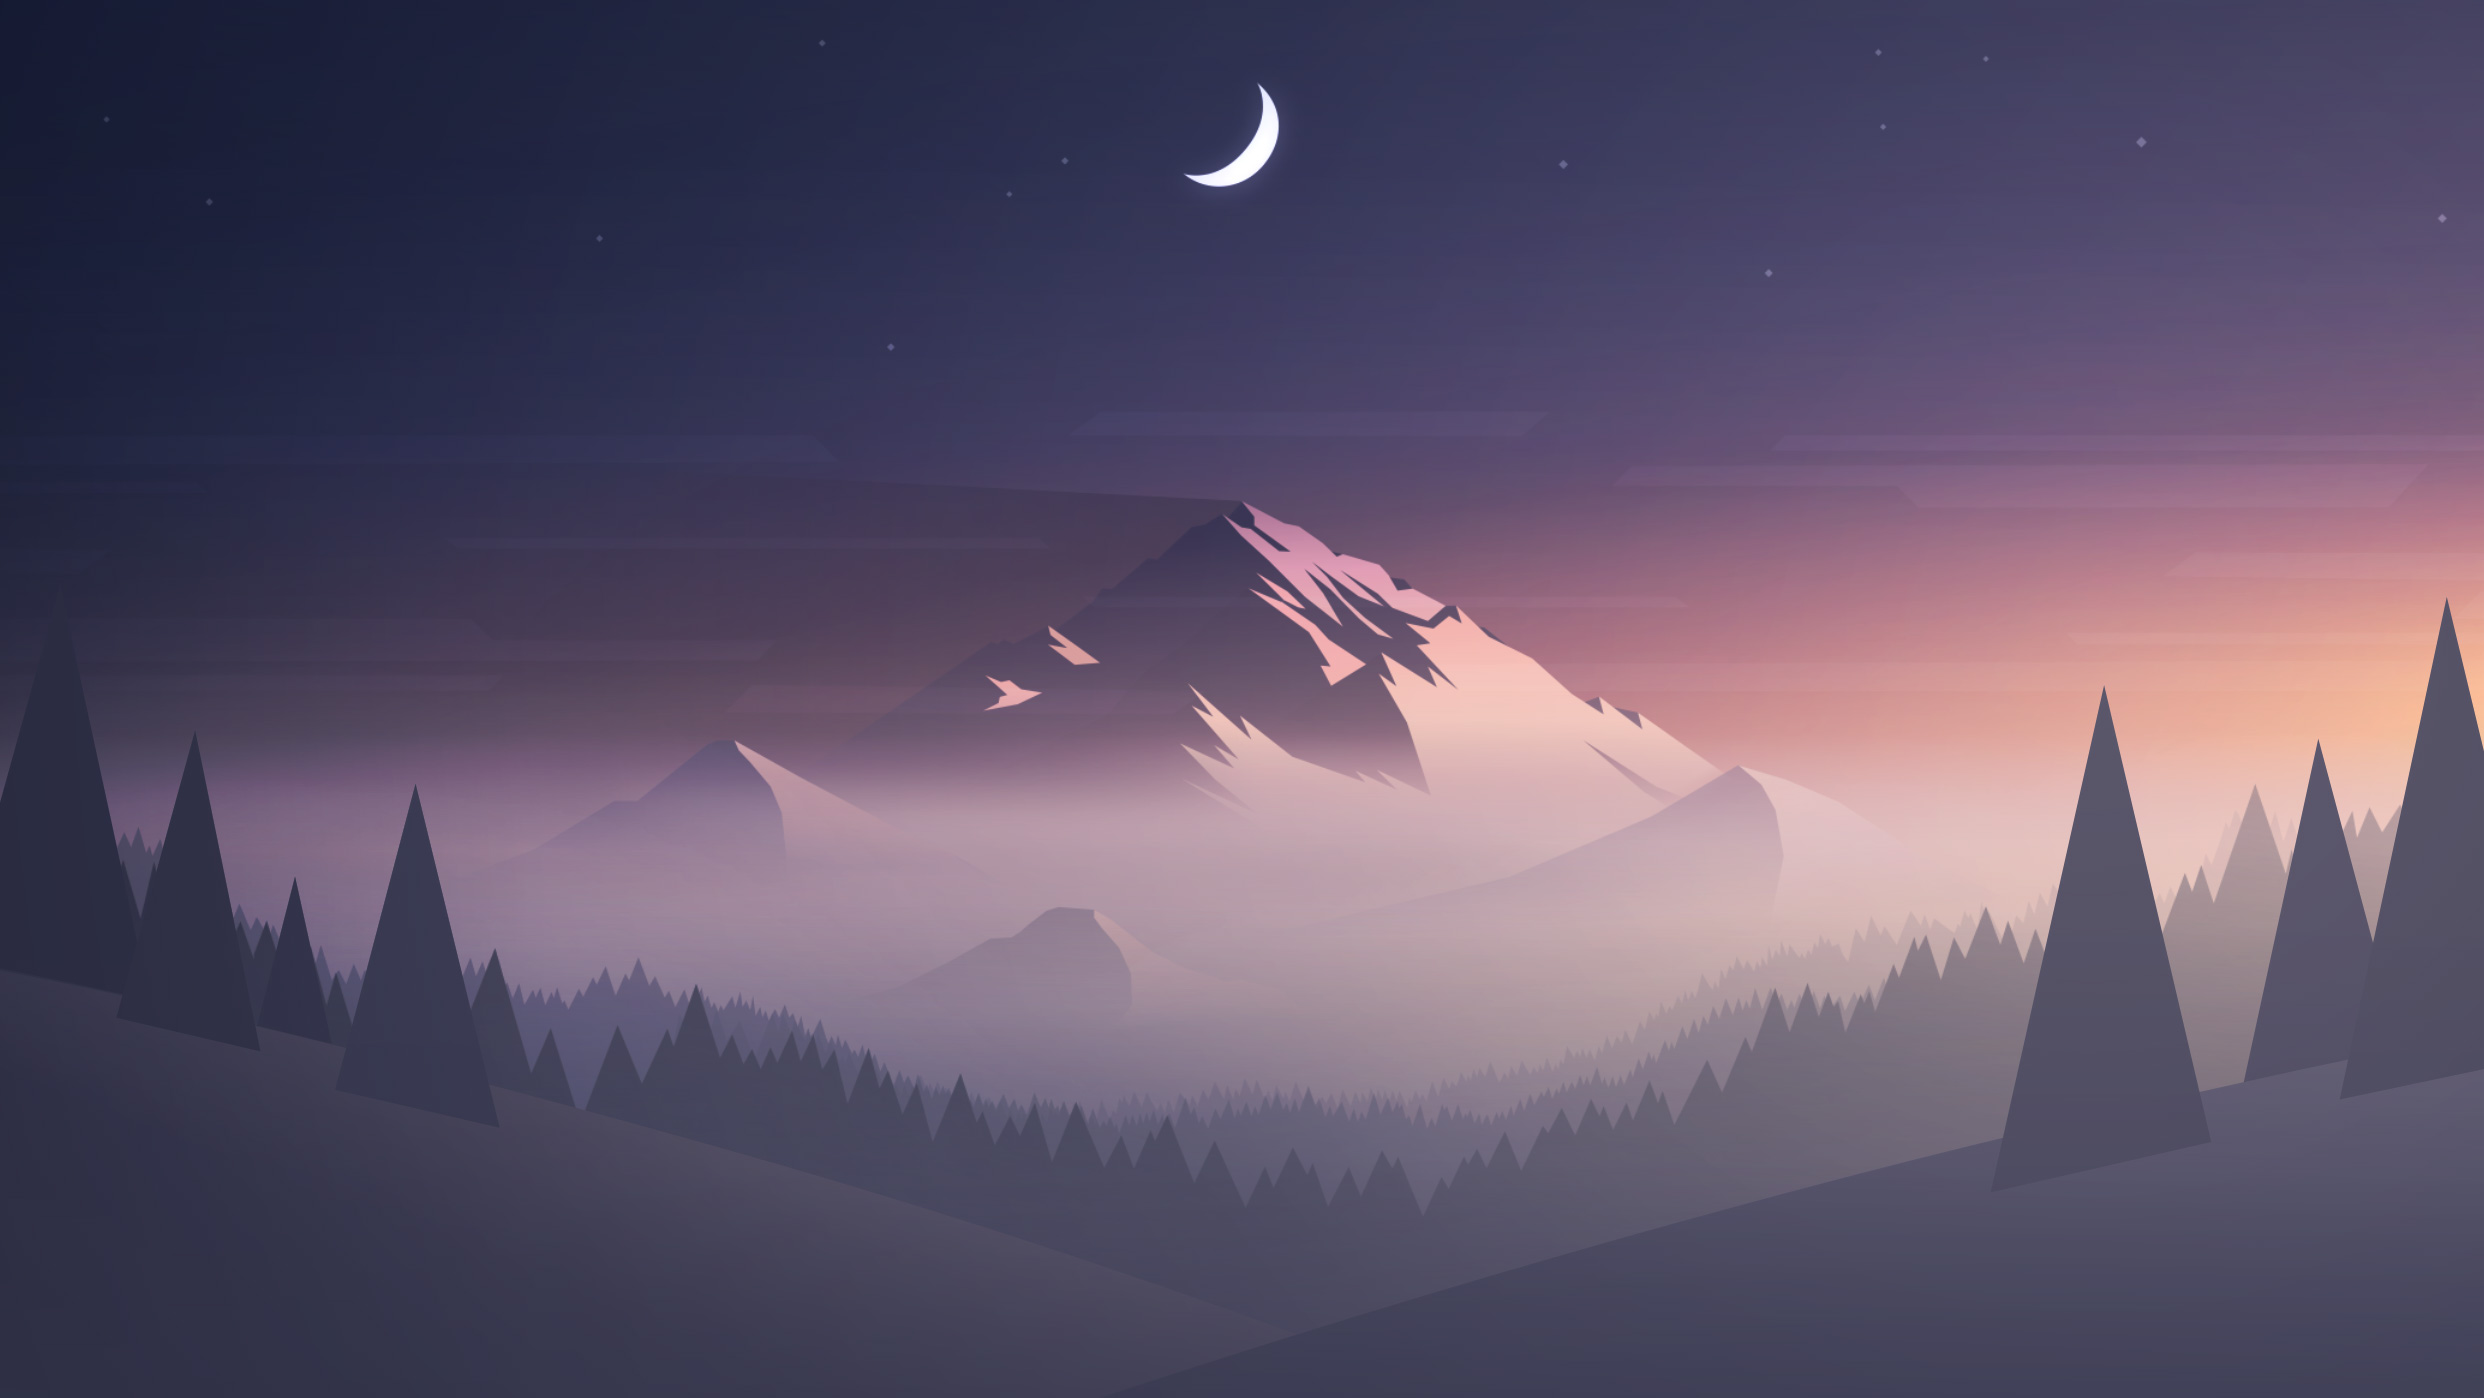 Artistic Minimalism Hd Mountains Wallpapers